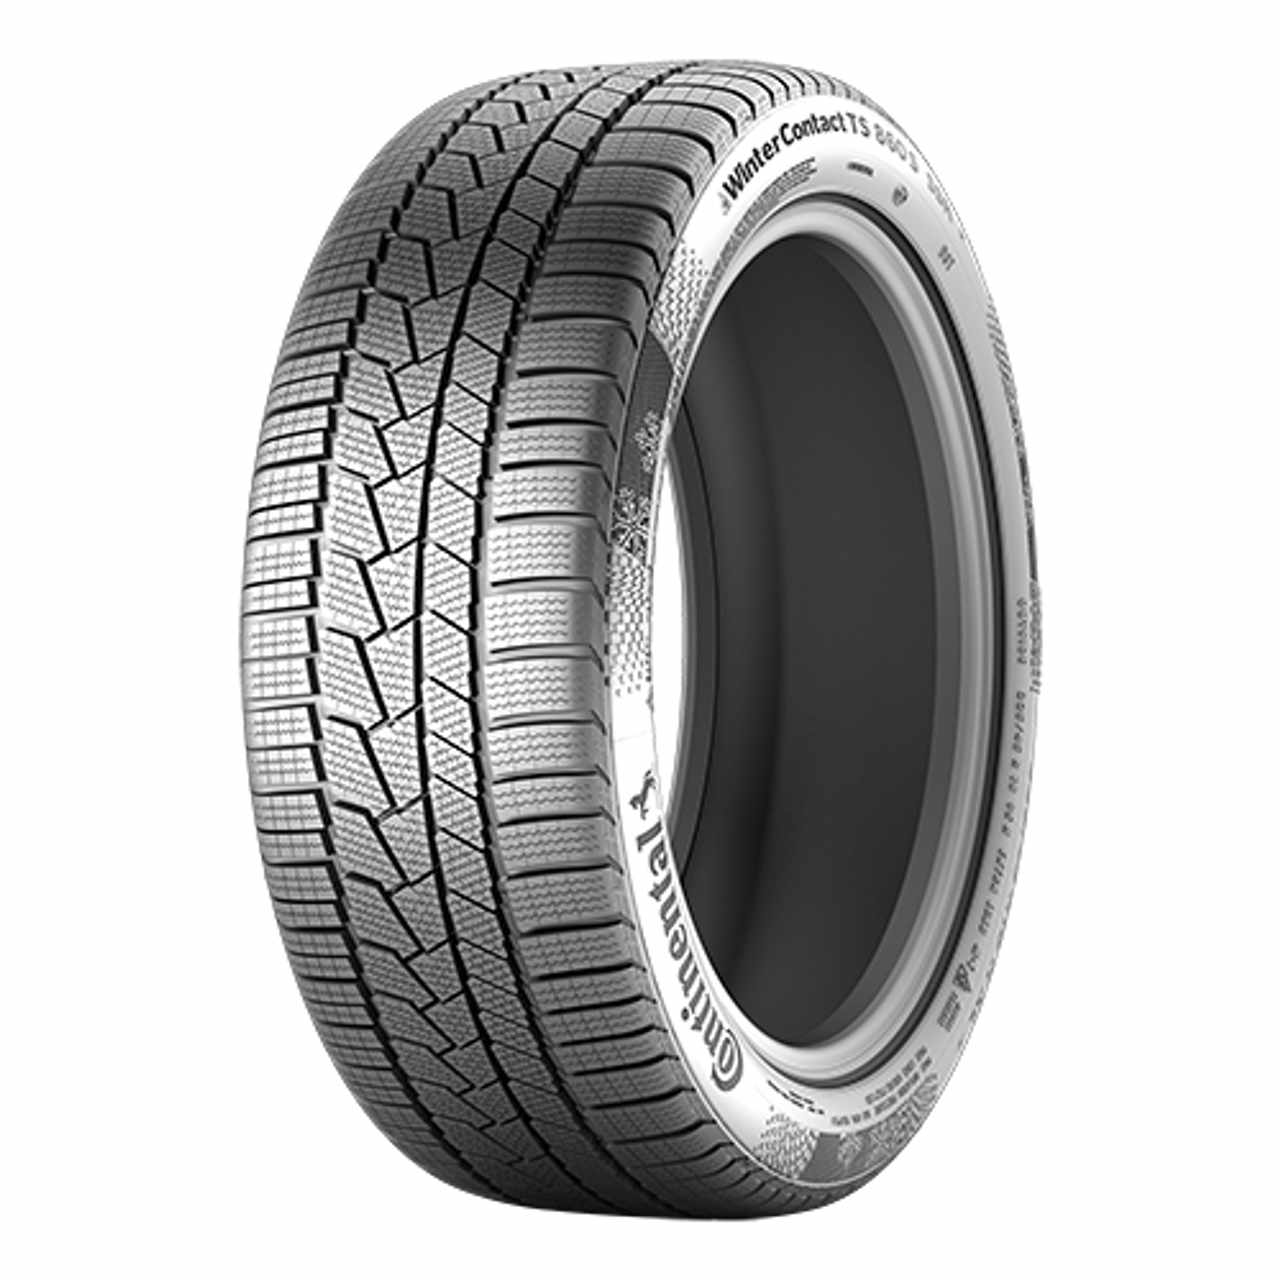 CONTINENTAL WINTERCONTACT TS 860 S (*) (EVc) 195/60R16 89H BSW